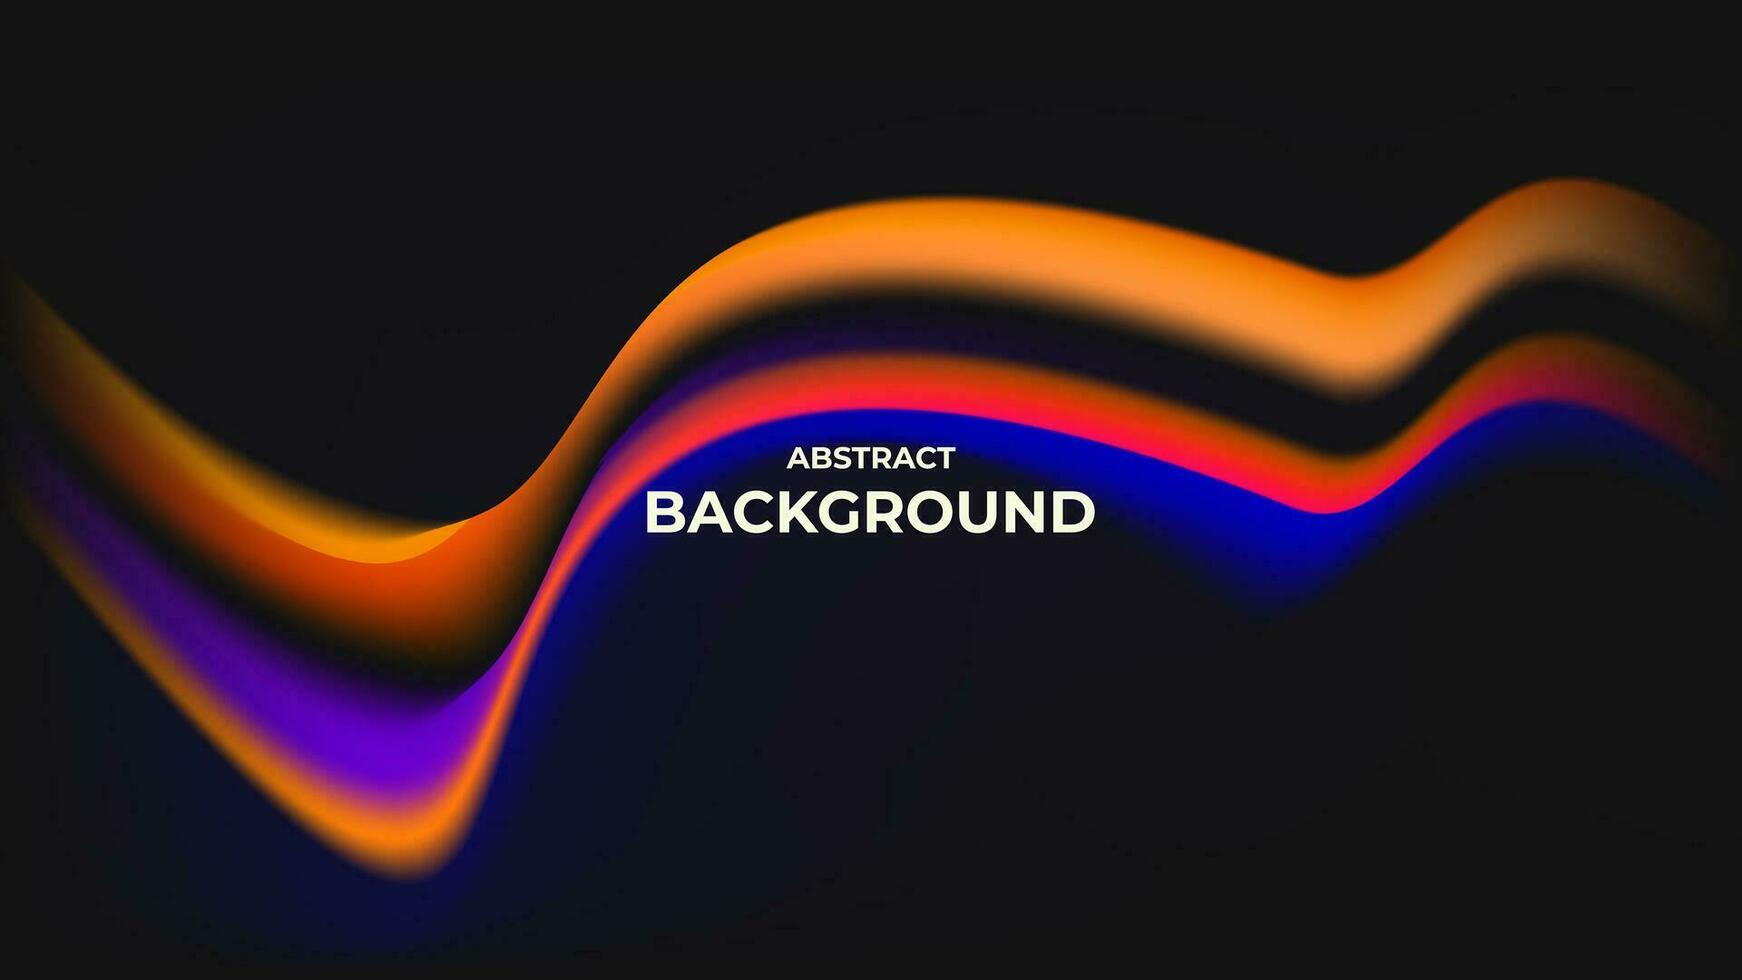 ABSTRACT DARK BACKGROUND WITH COLORFUL GRADIENT SMOOTH LIQUID COLOR DESIGN VECTOR TEMPLATE GOOD FOR MODERN WEBSITE, WALLPAPER, COVER DESIGN